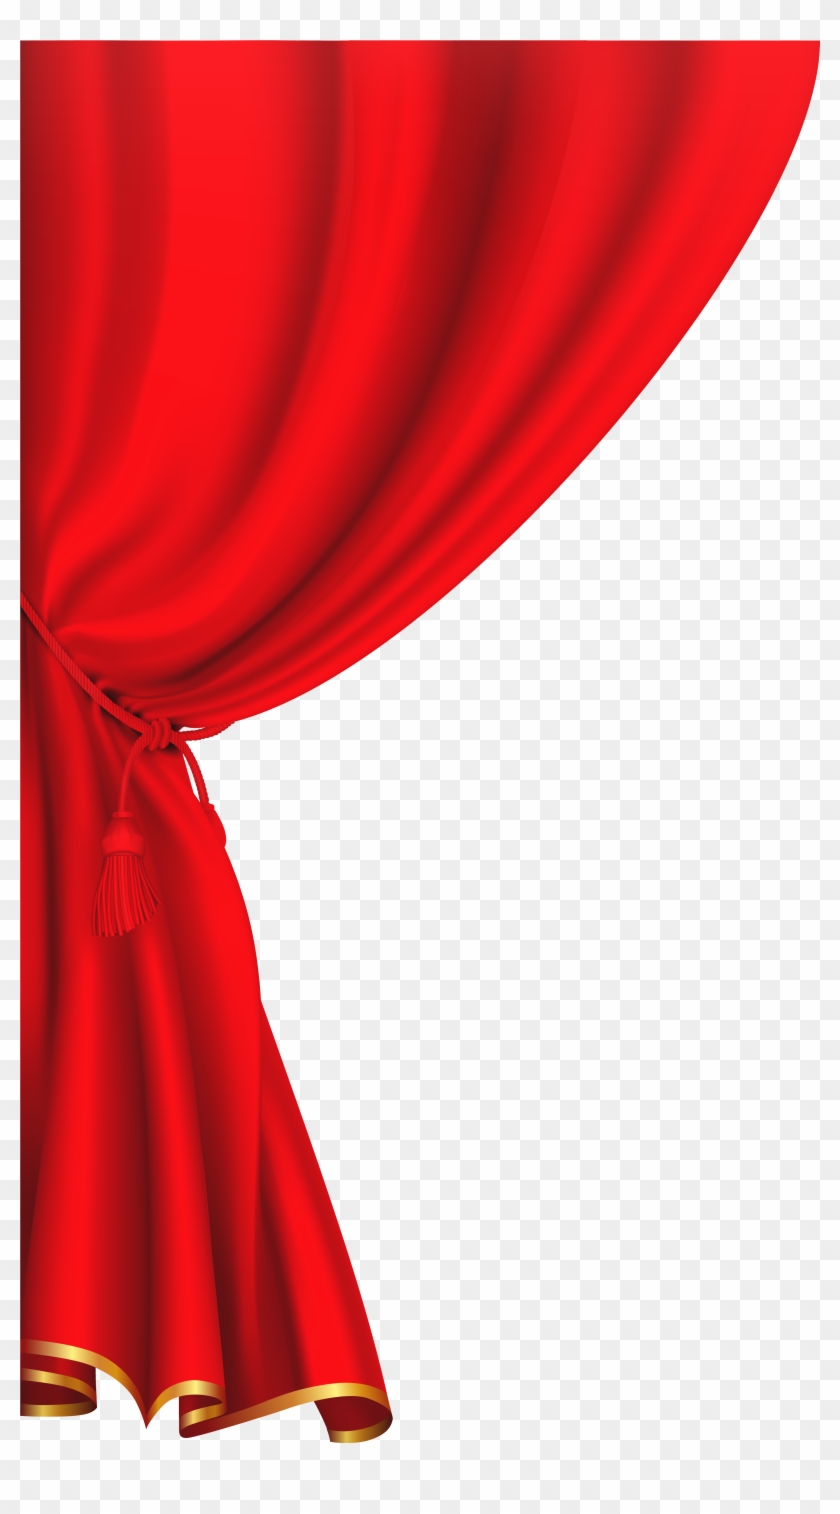 Red Curtain Clipart Image - Red Curtain Clipart #214007